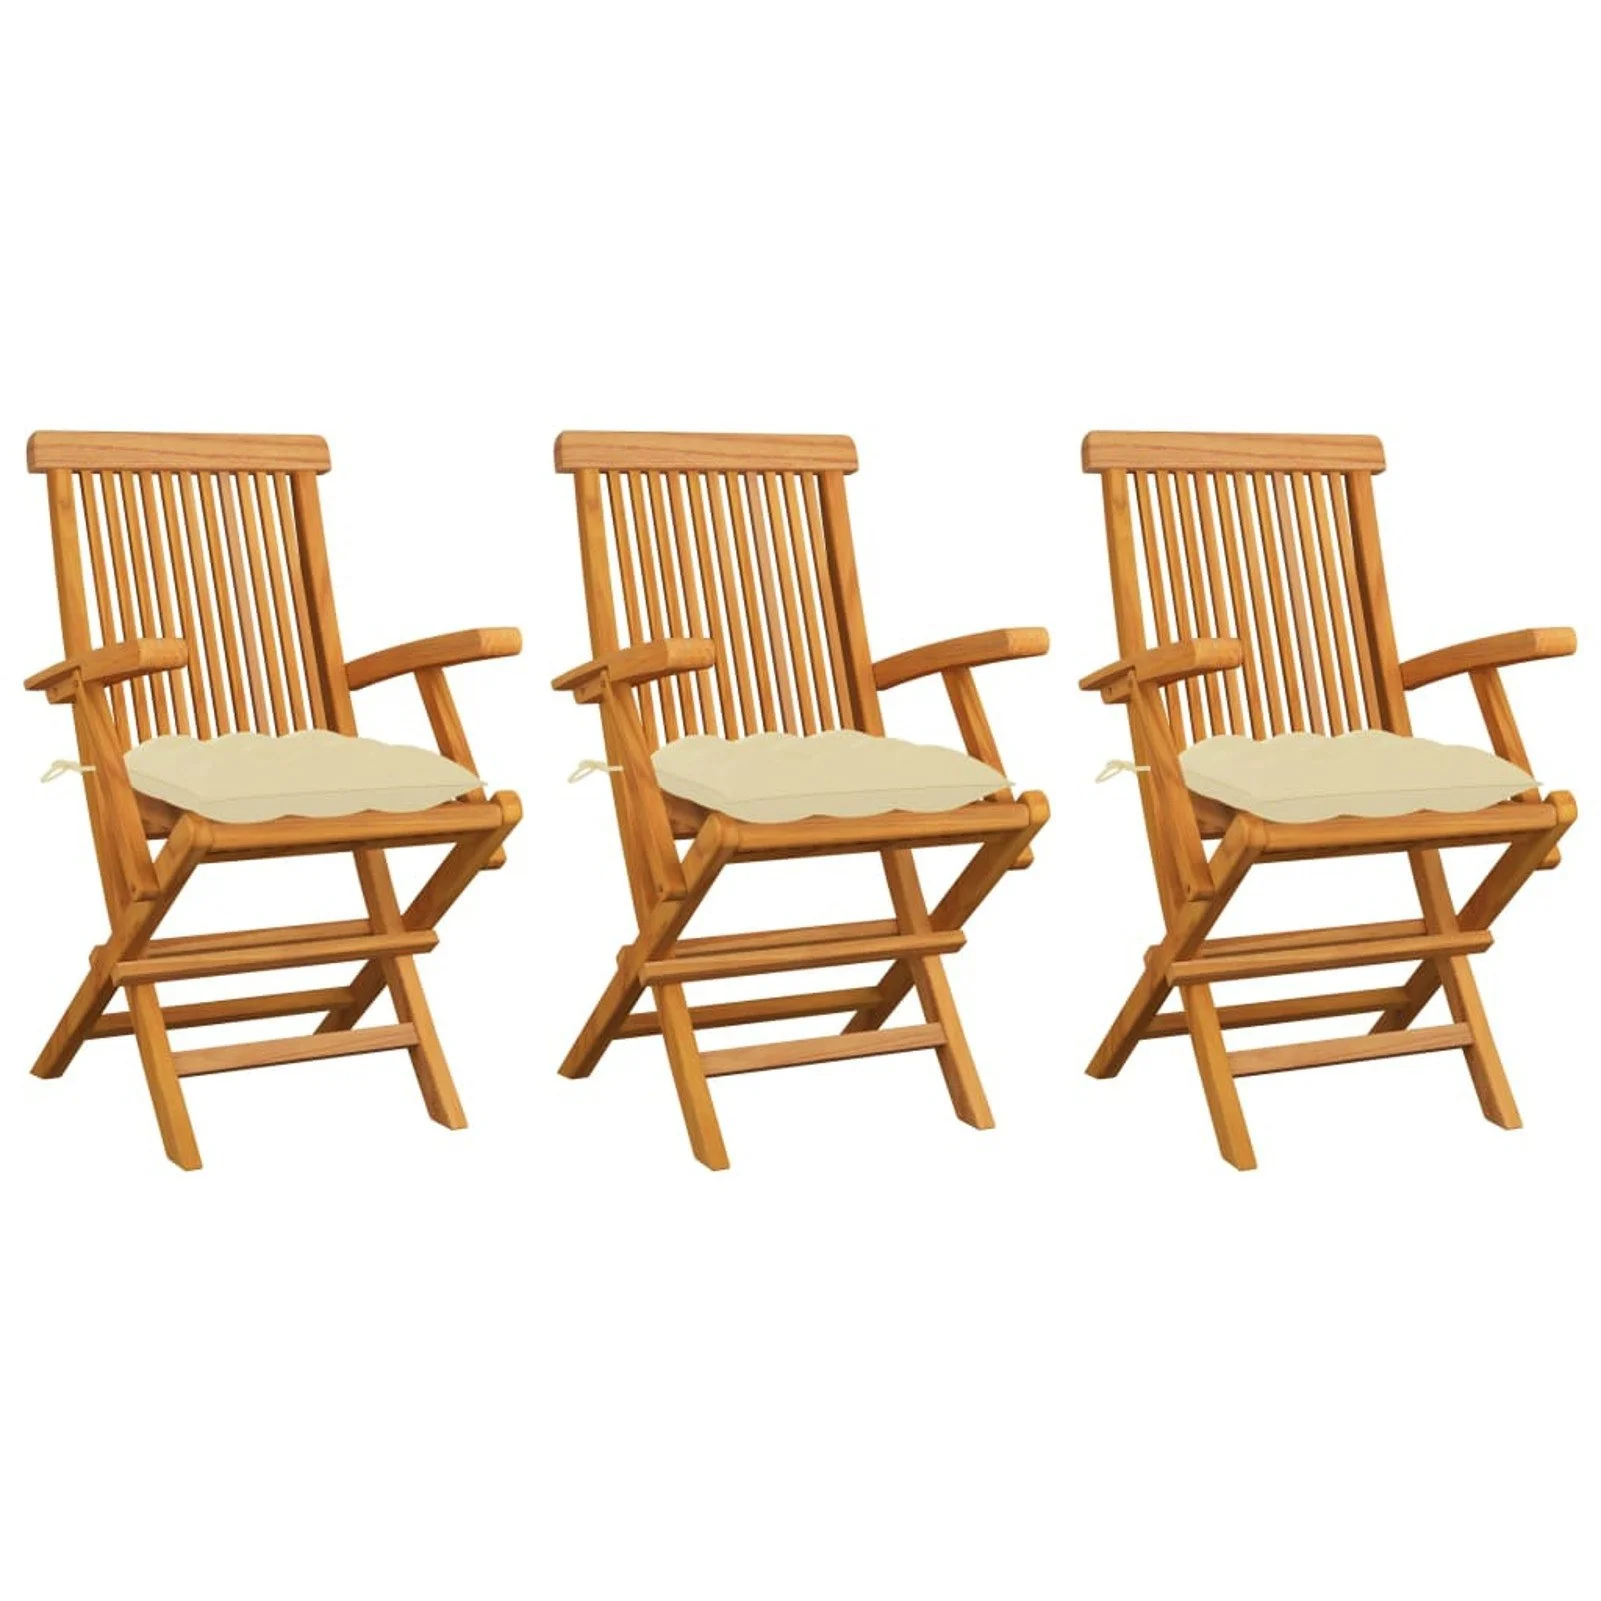 

Patio Chairs with Cream White Cushions 3 pcs Solid Teak Wood